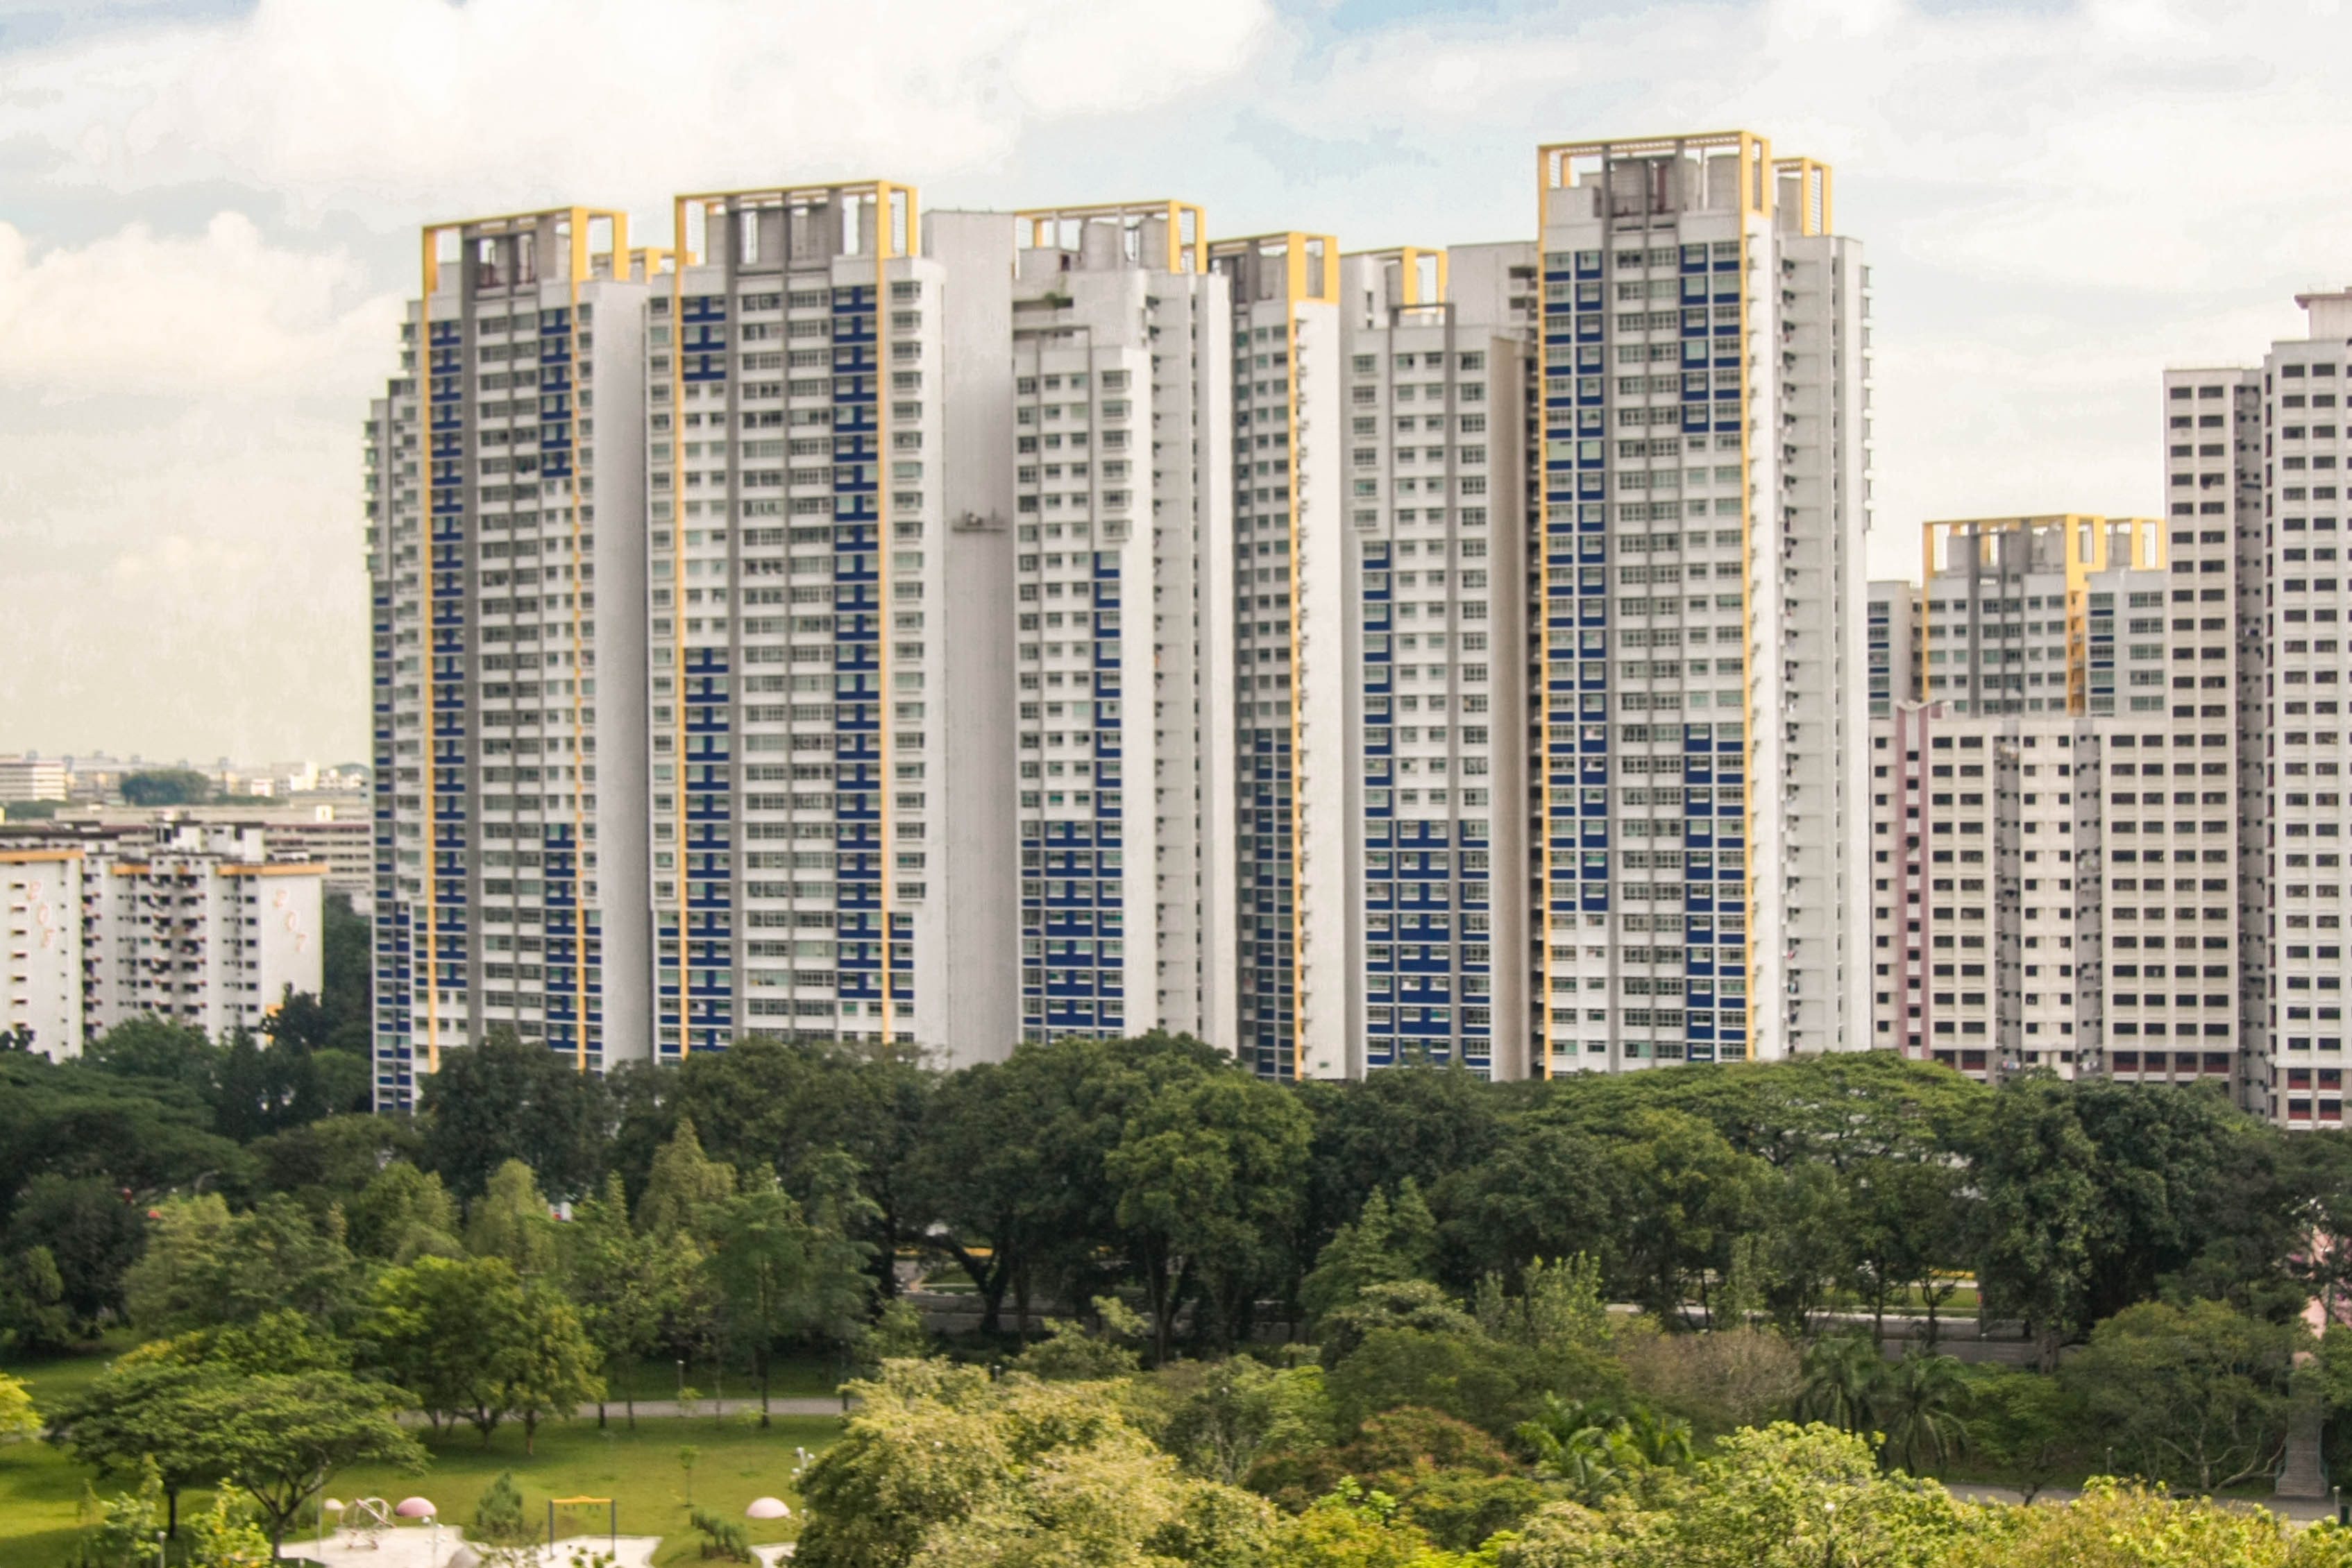  HDB  resale prices see further declines Property Market 